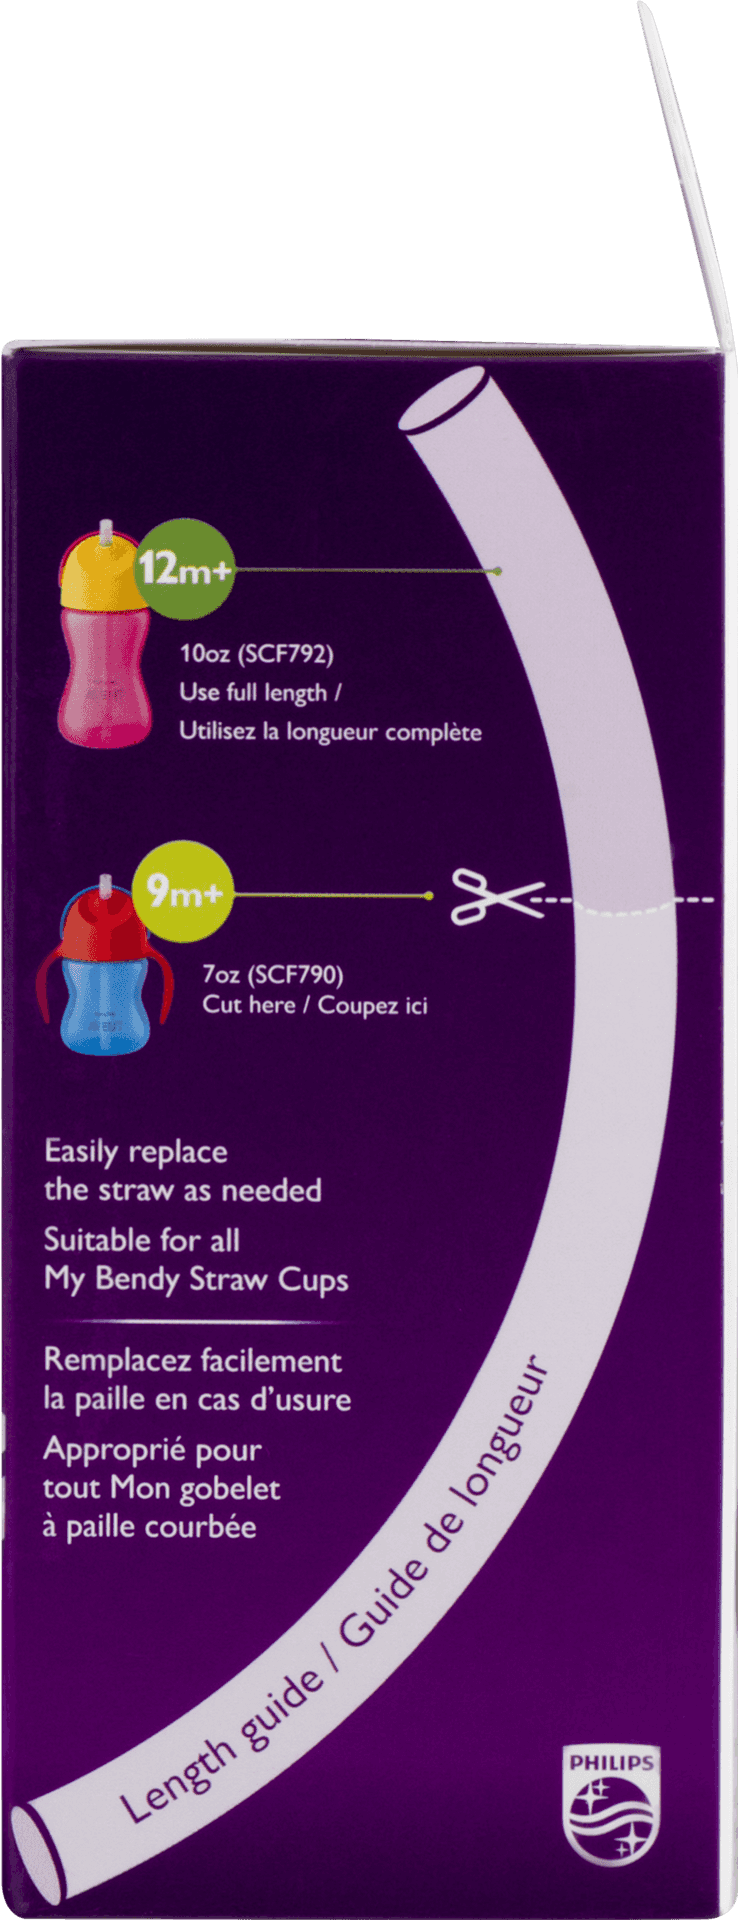 Philips My Bendy Straw Replacement Guide PNG